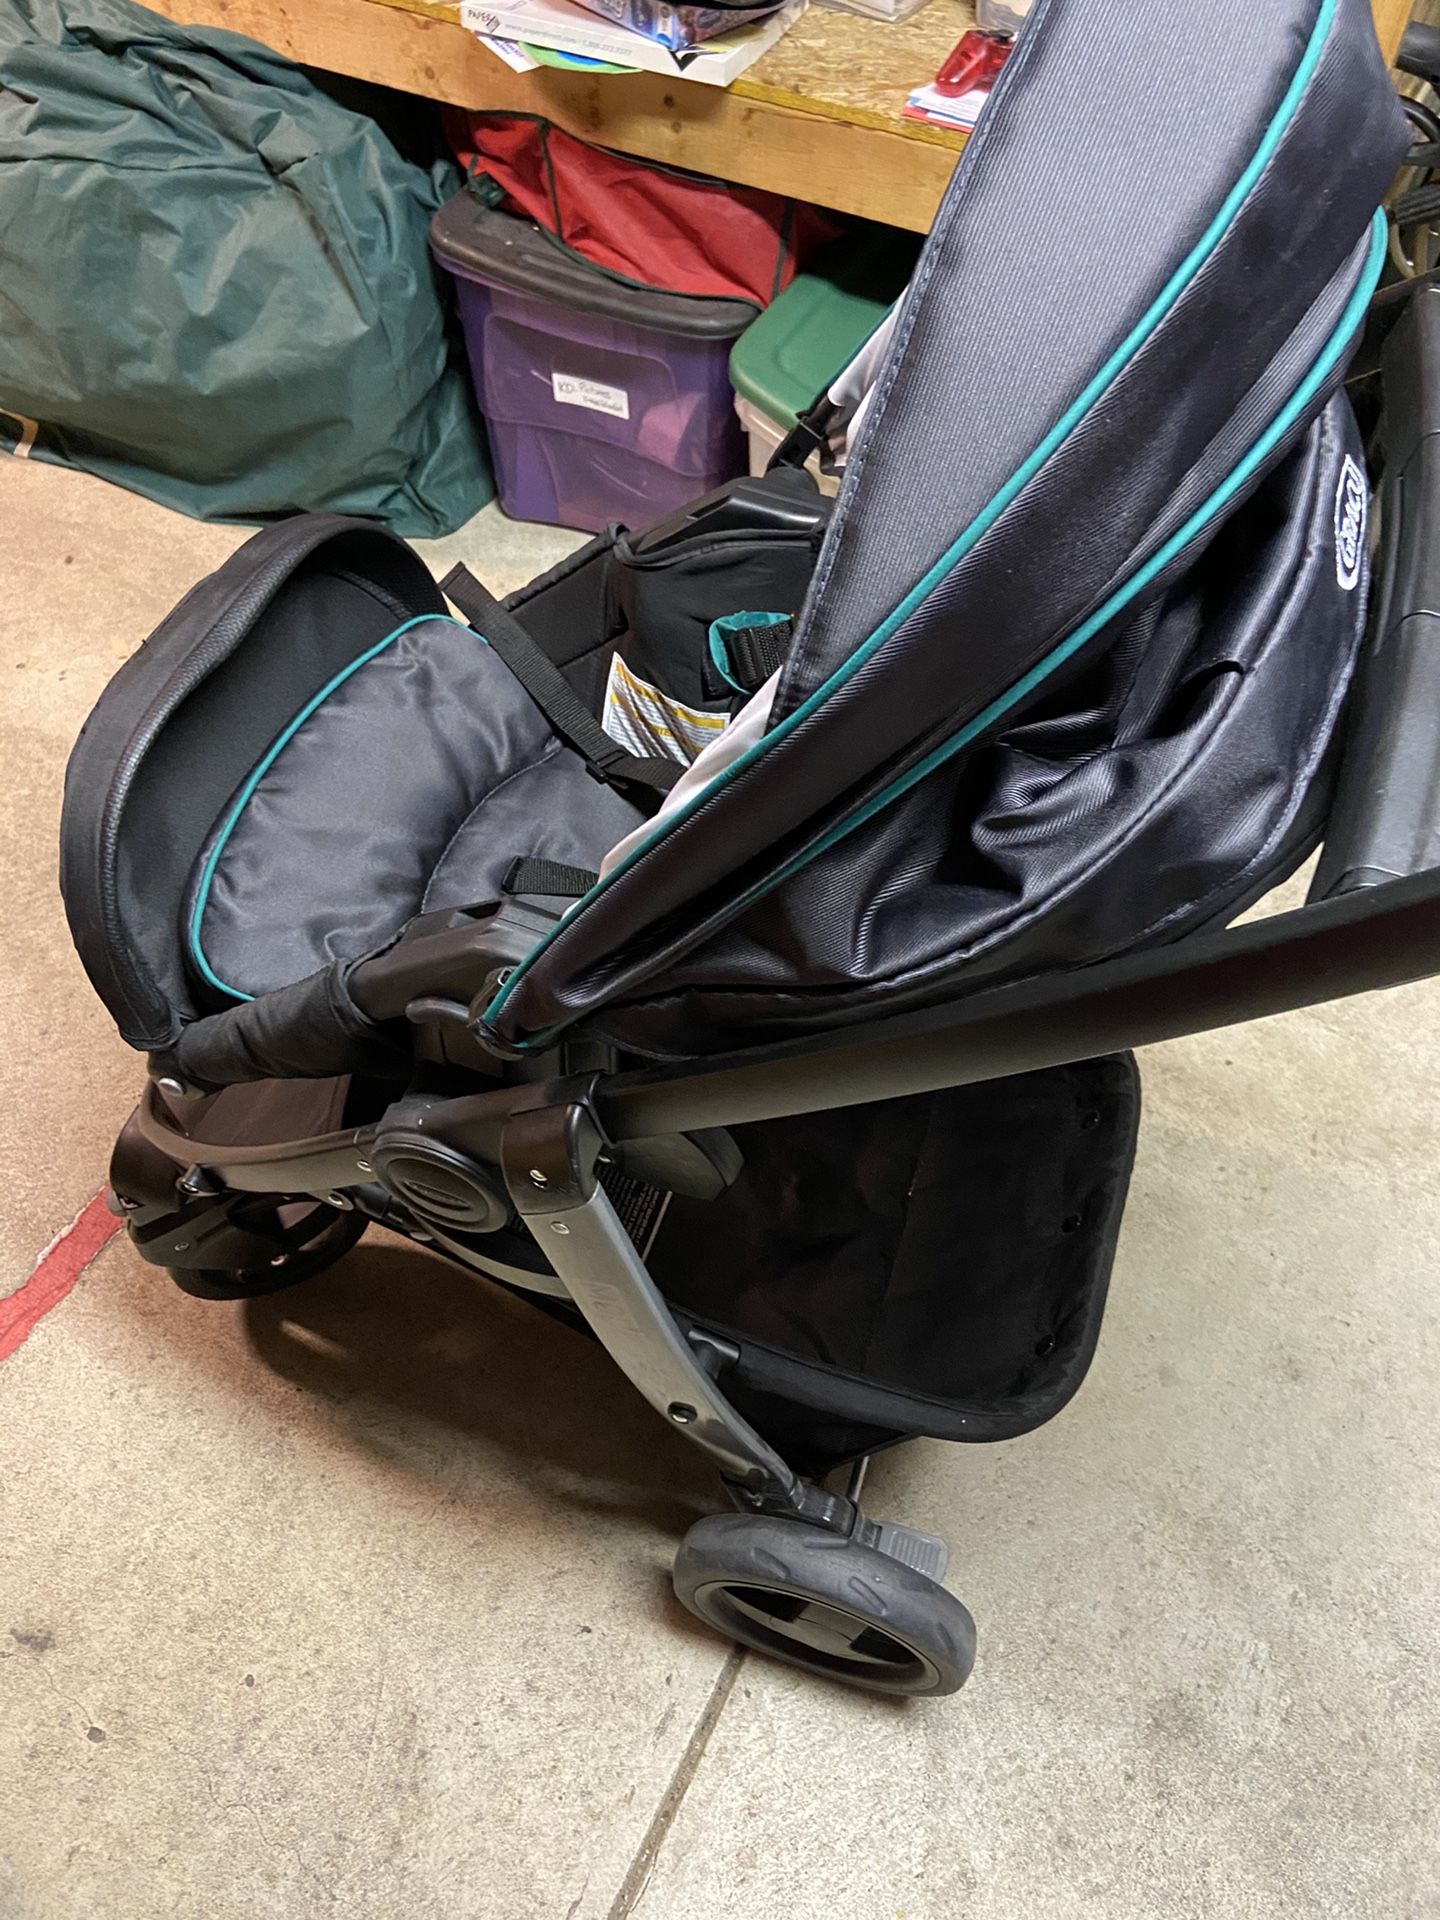 Graco combination car seat with stroller